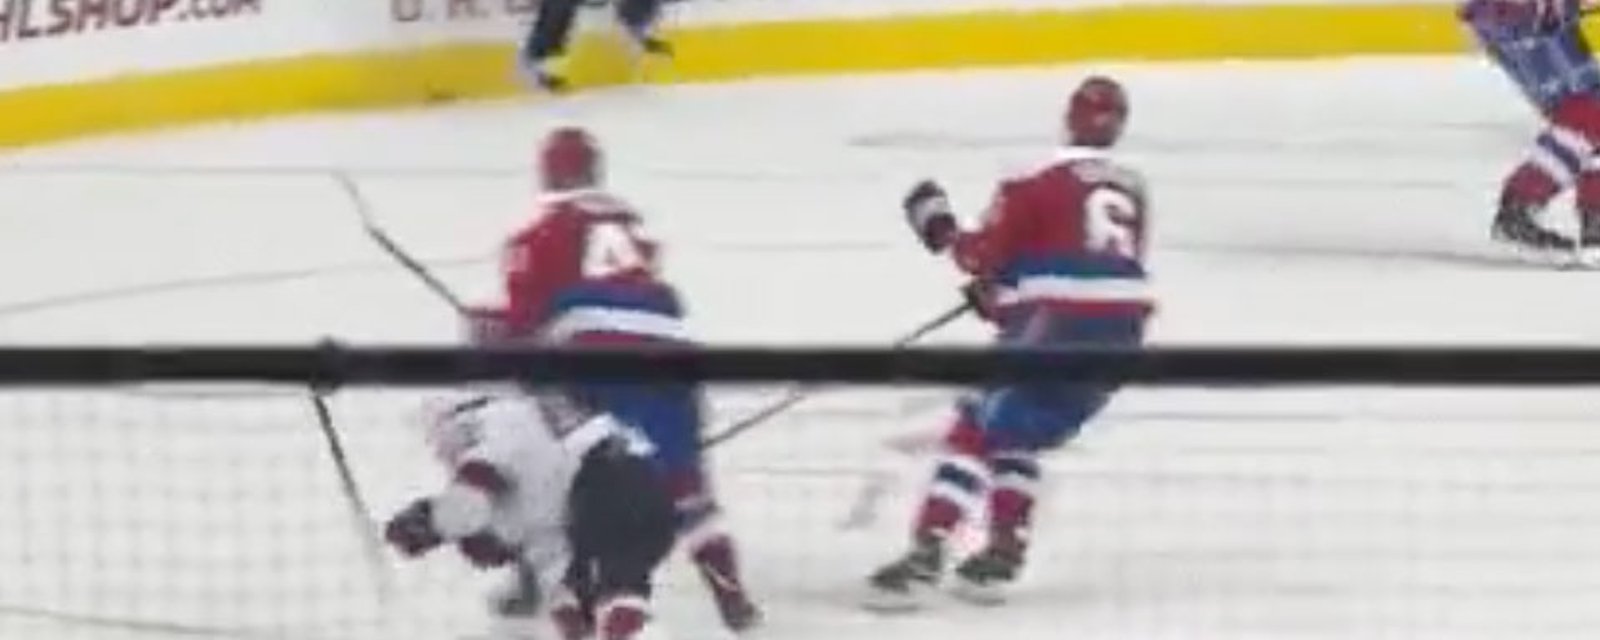 Breaking: Tom Wilson gets handed down a match penalty for another illegal hit to the head! 